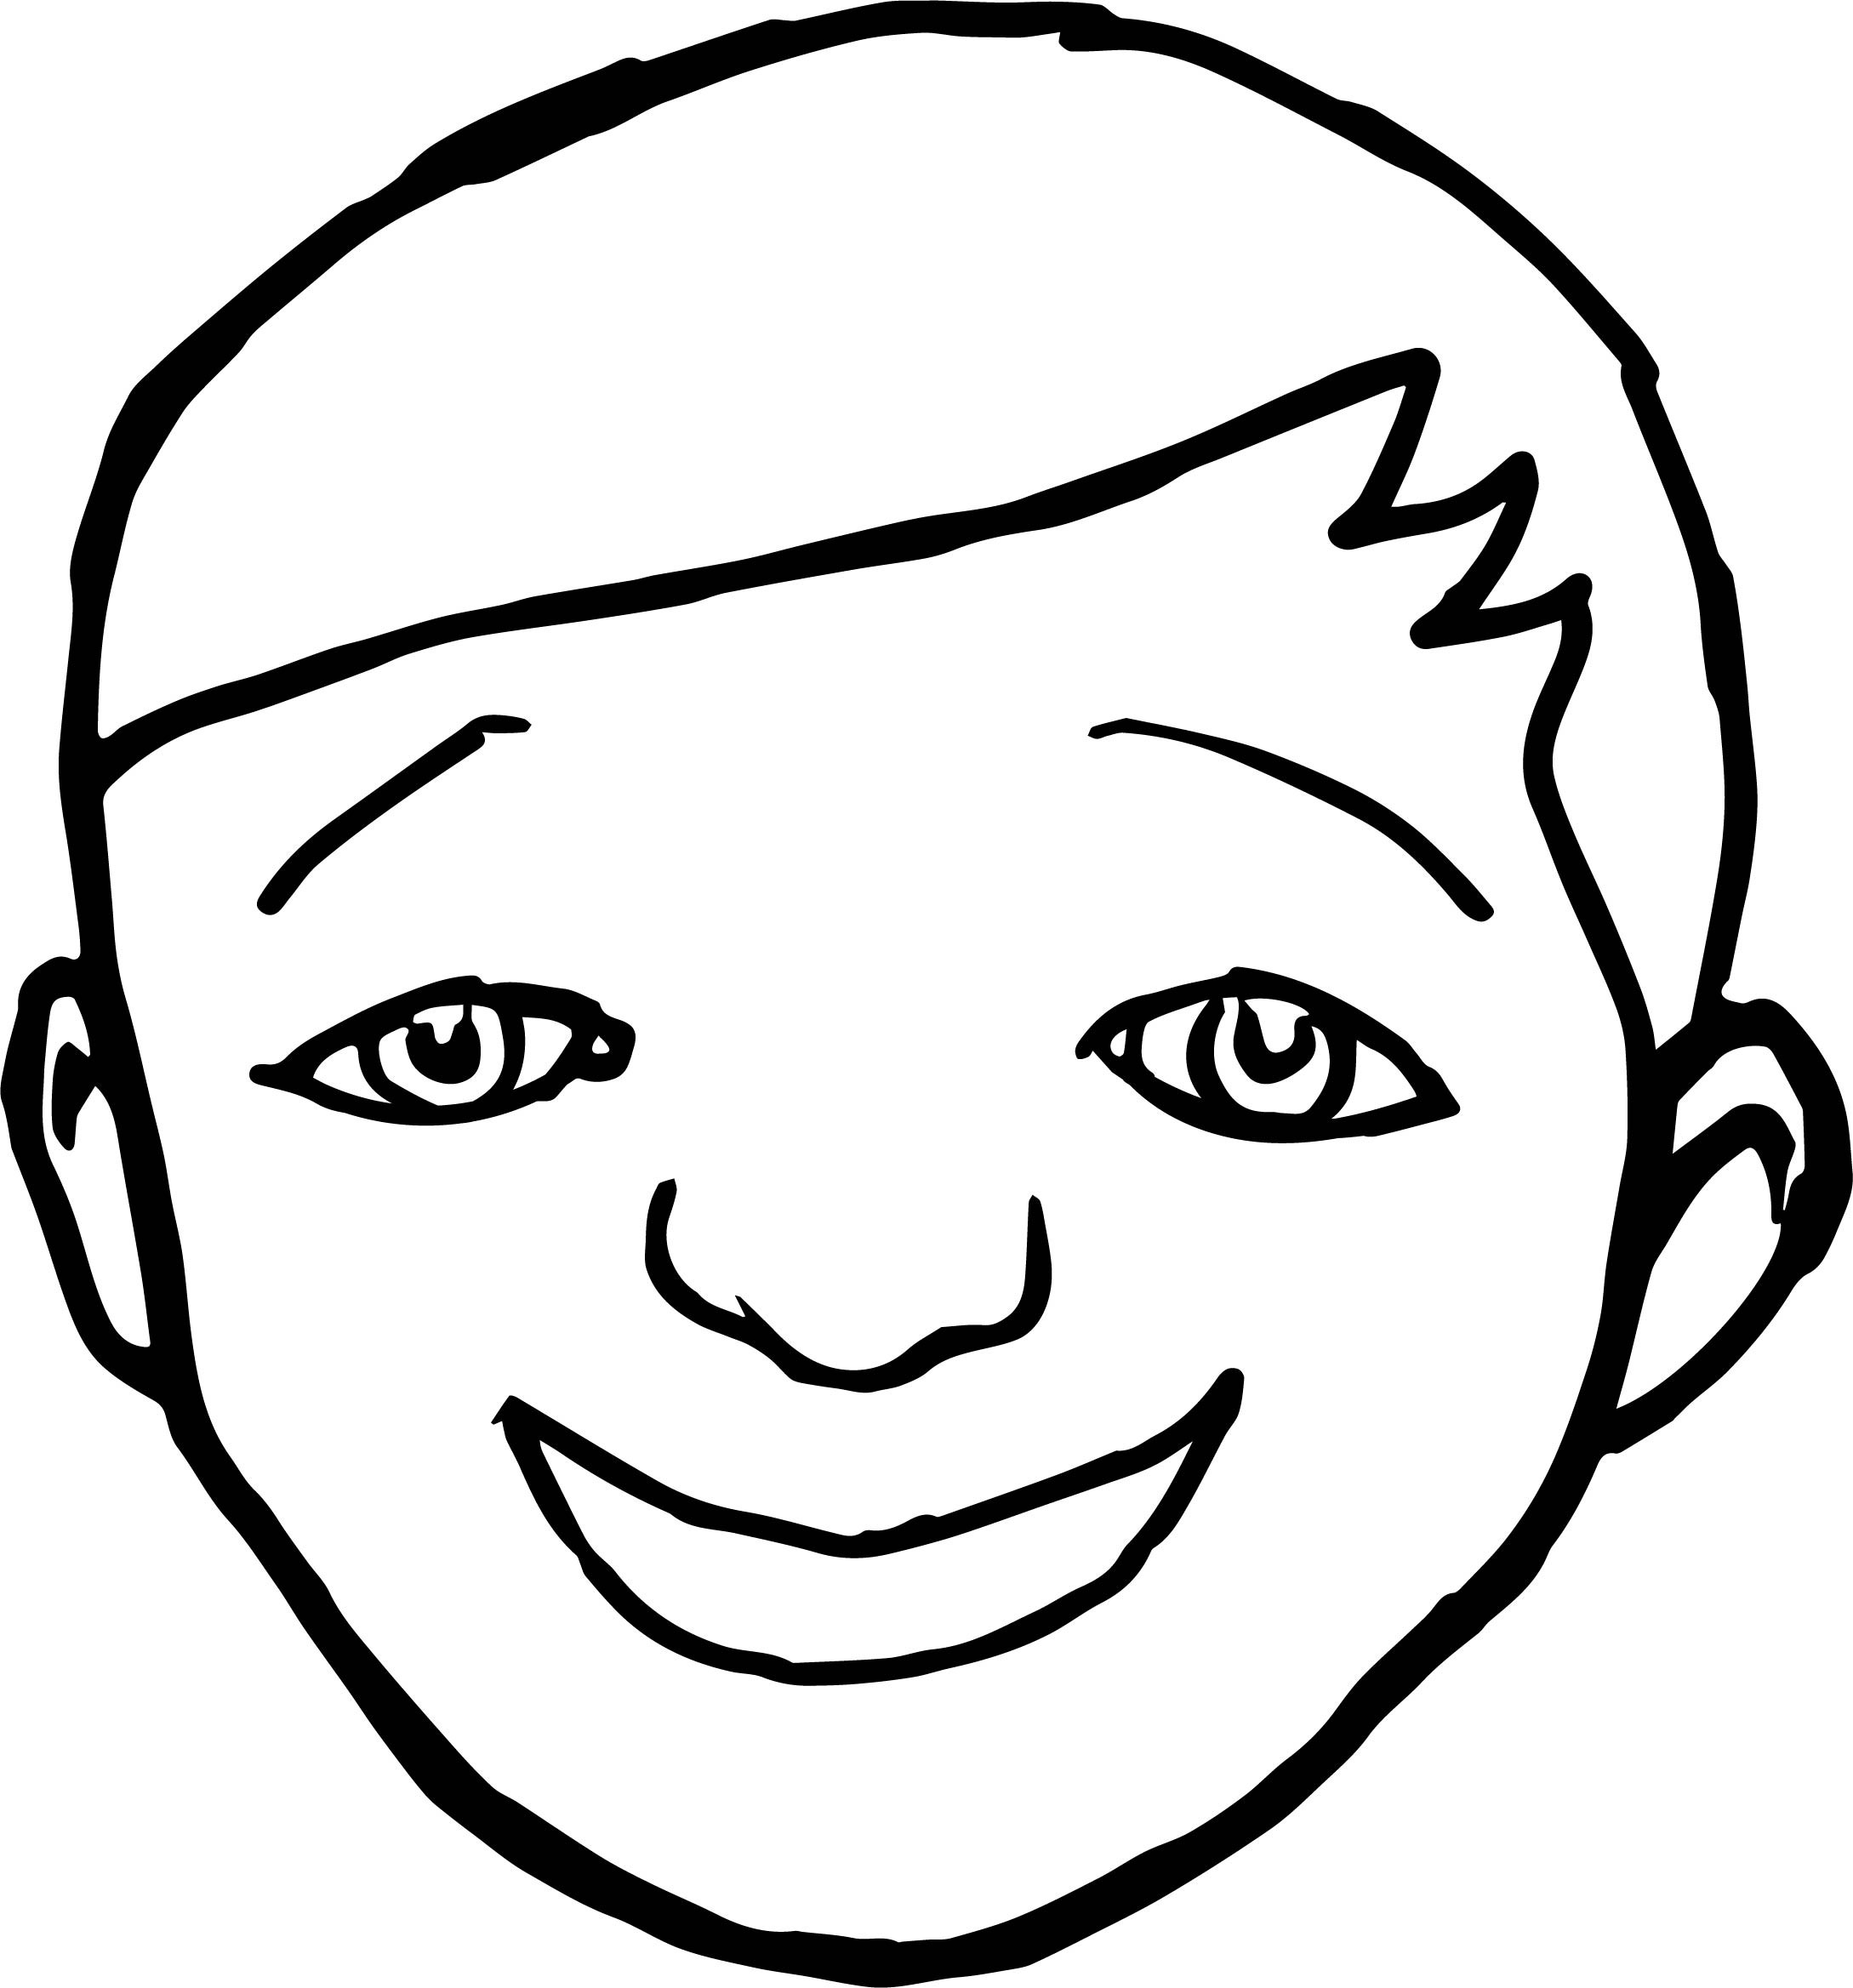 Boys Face Coloring Pages
 Smile Face Boy Coloring Page